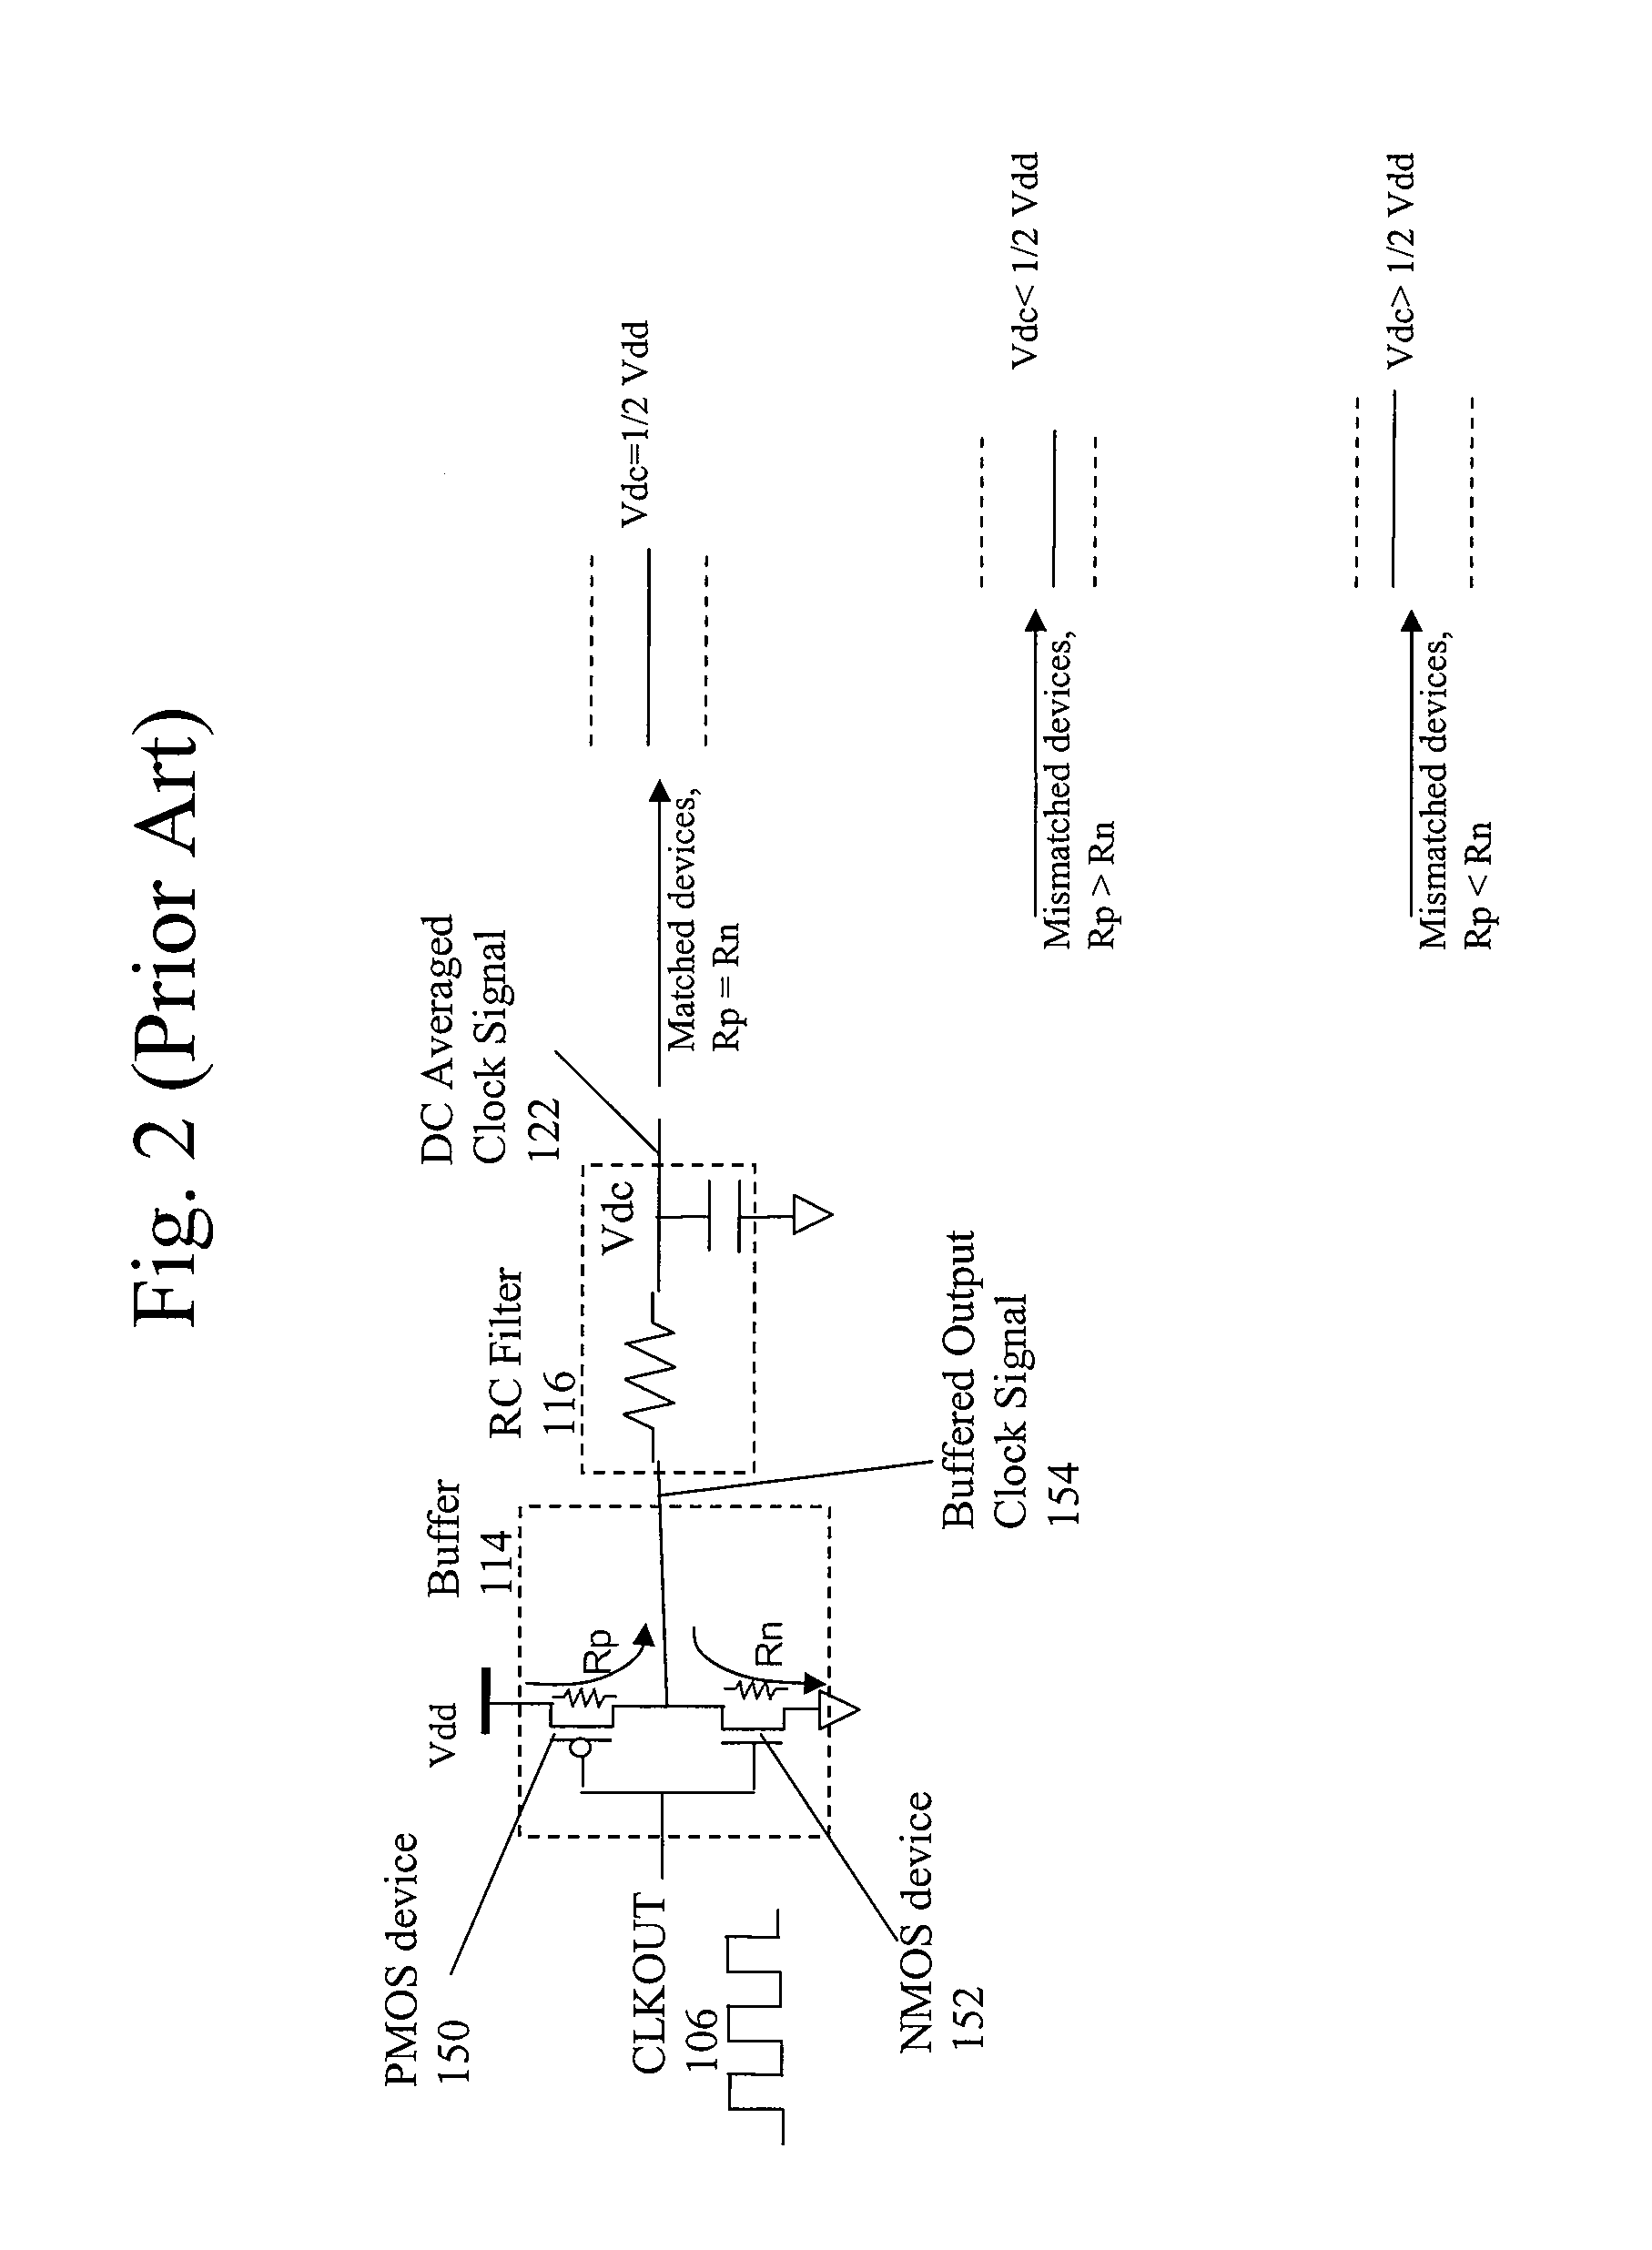 Duty cycle correction circuit for high-speed clock signals